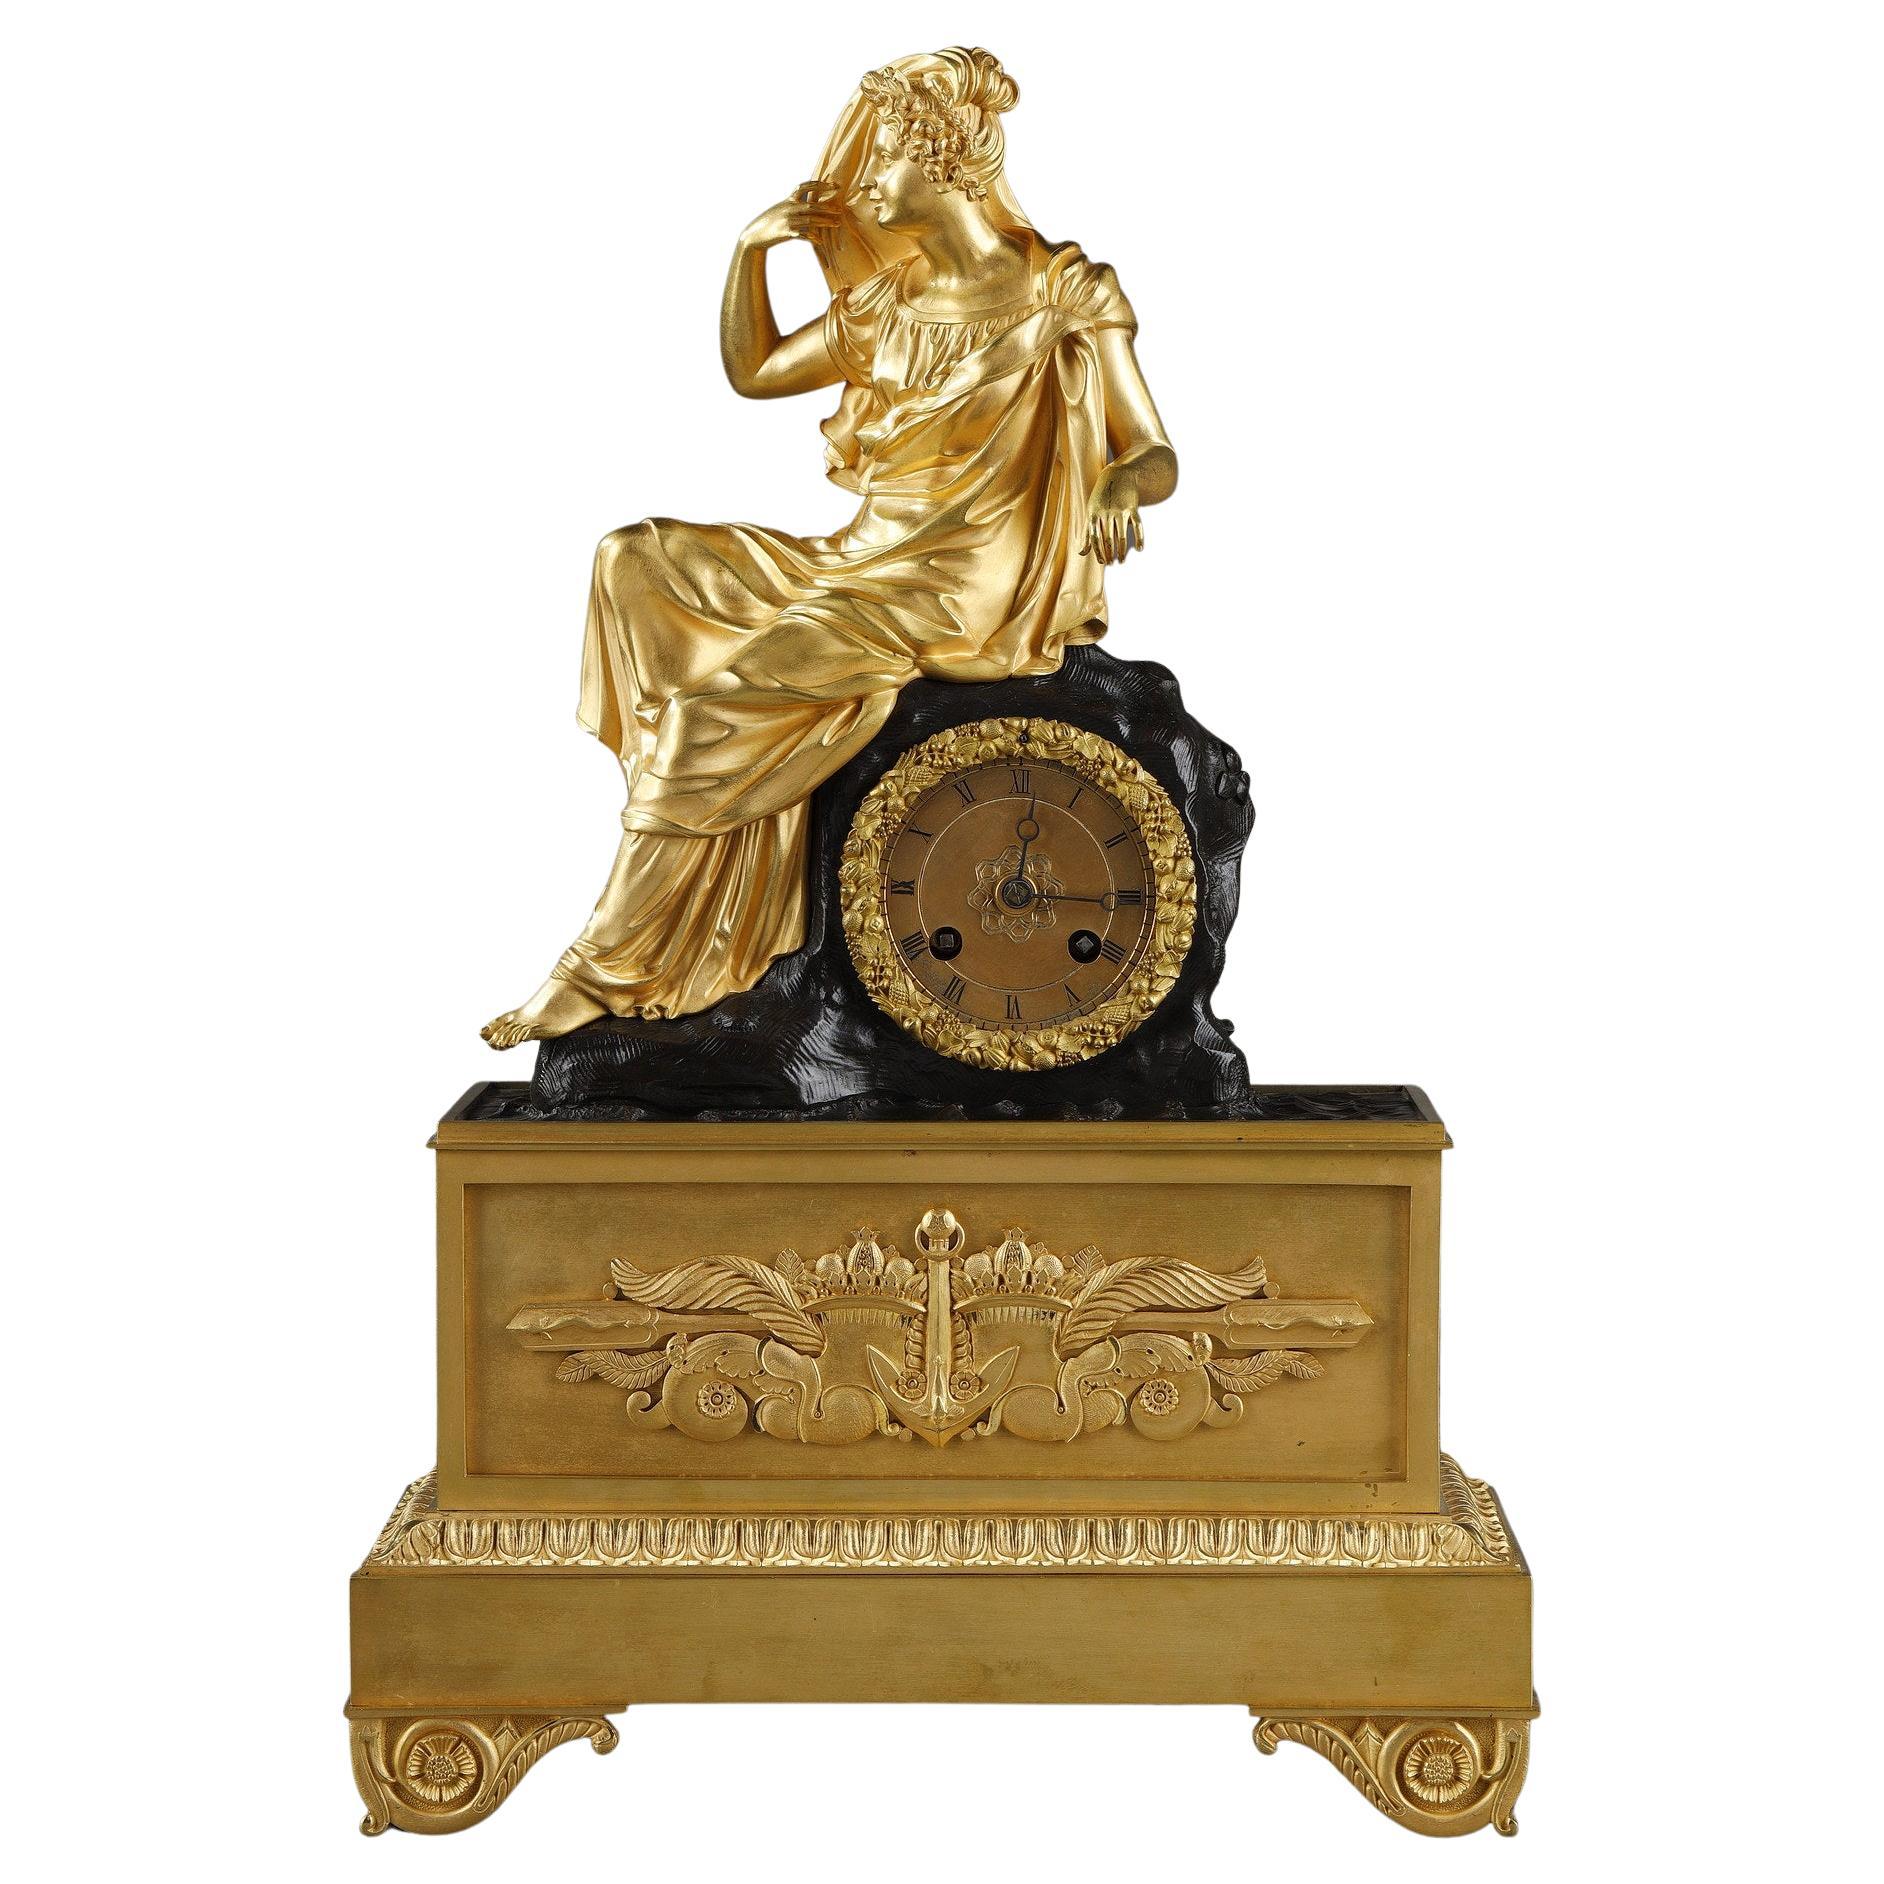 Restoration Period Clock in Gilt Bronze with a Young Woman For Sale